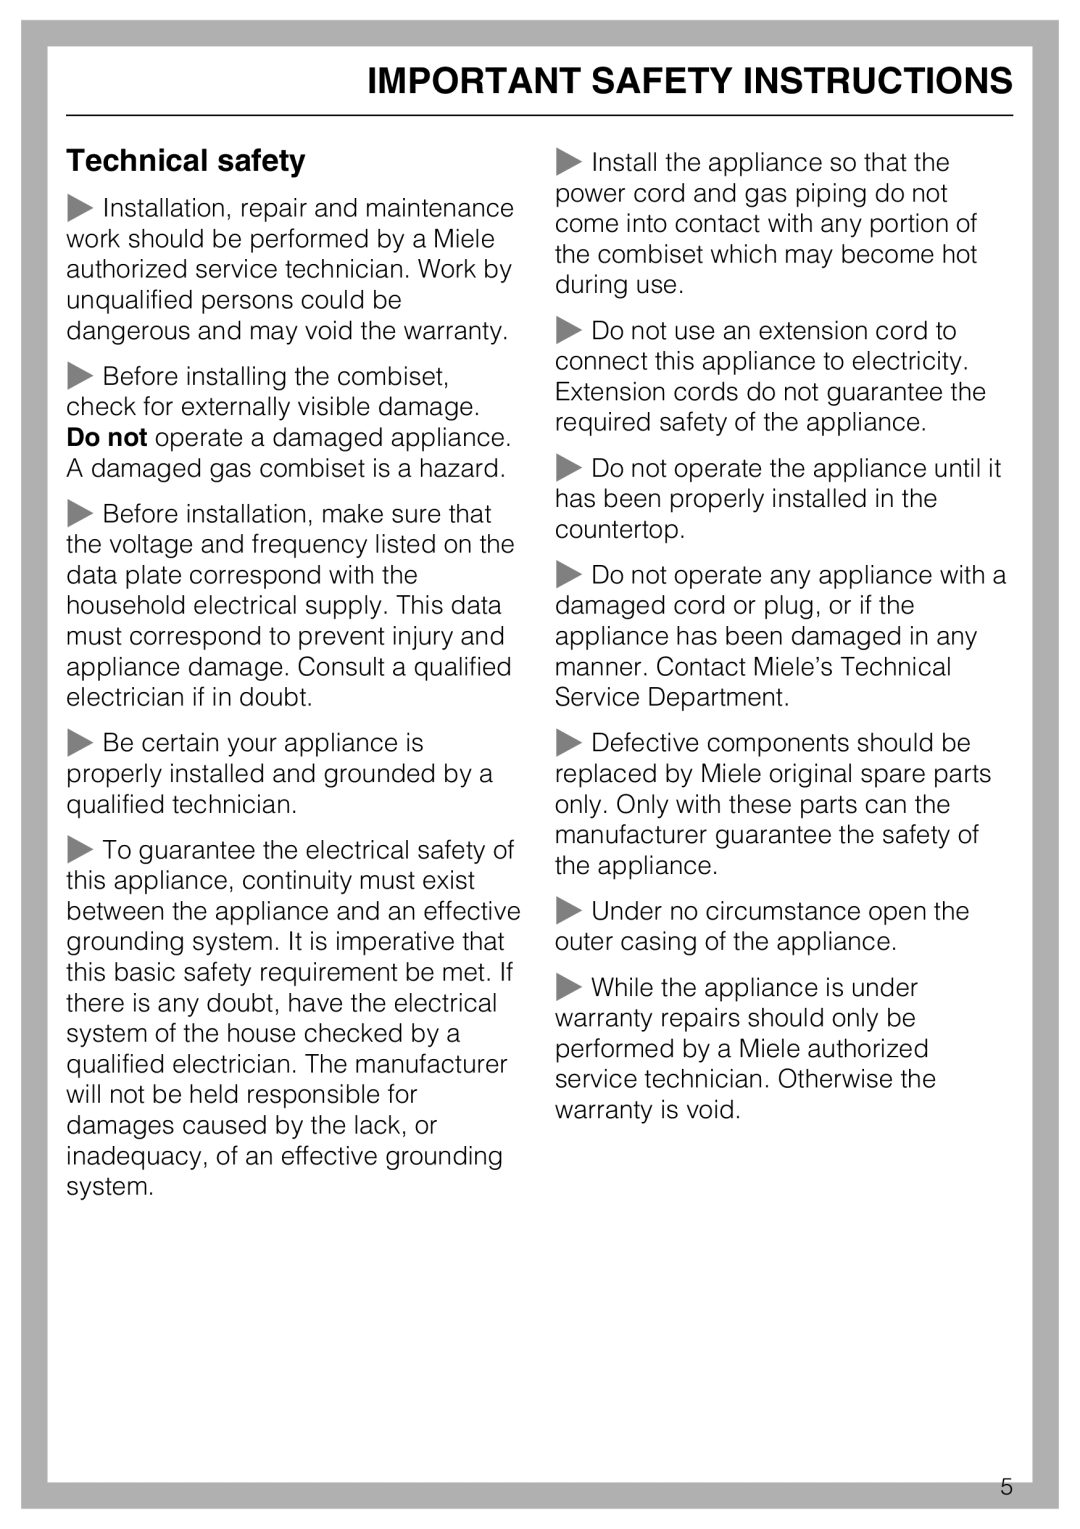 Miele CS1012 installation instructions Technical safety, Important Safety Instructions 